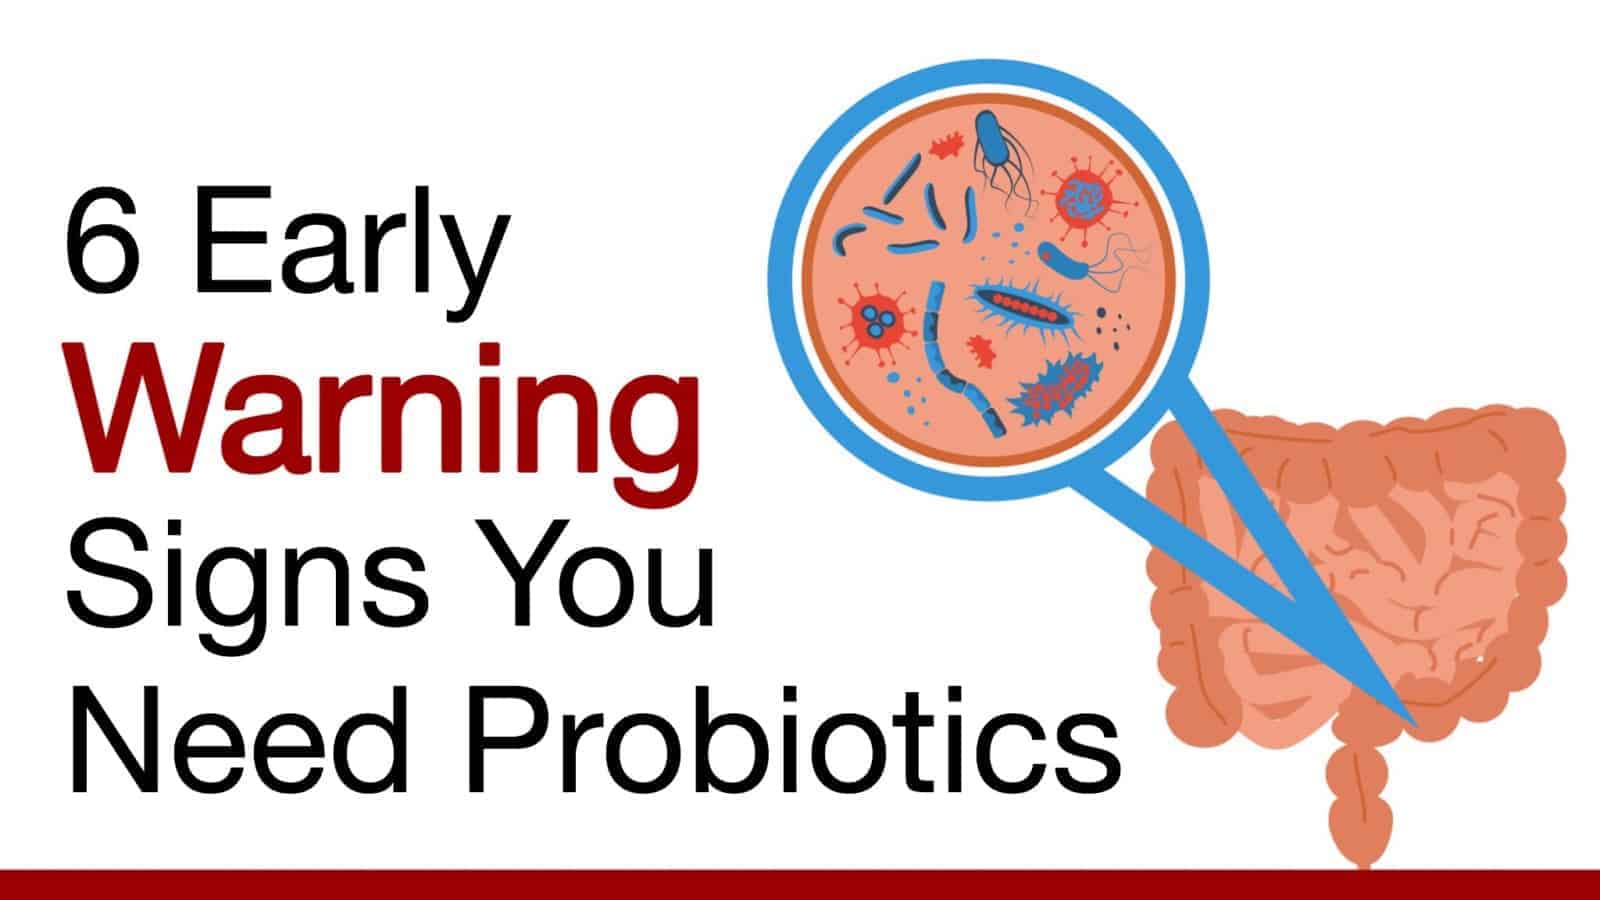 6 Early Warning Signs Your Body Needs Probiotics